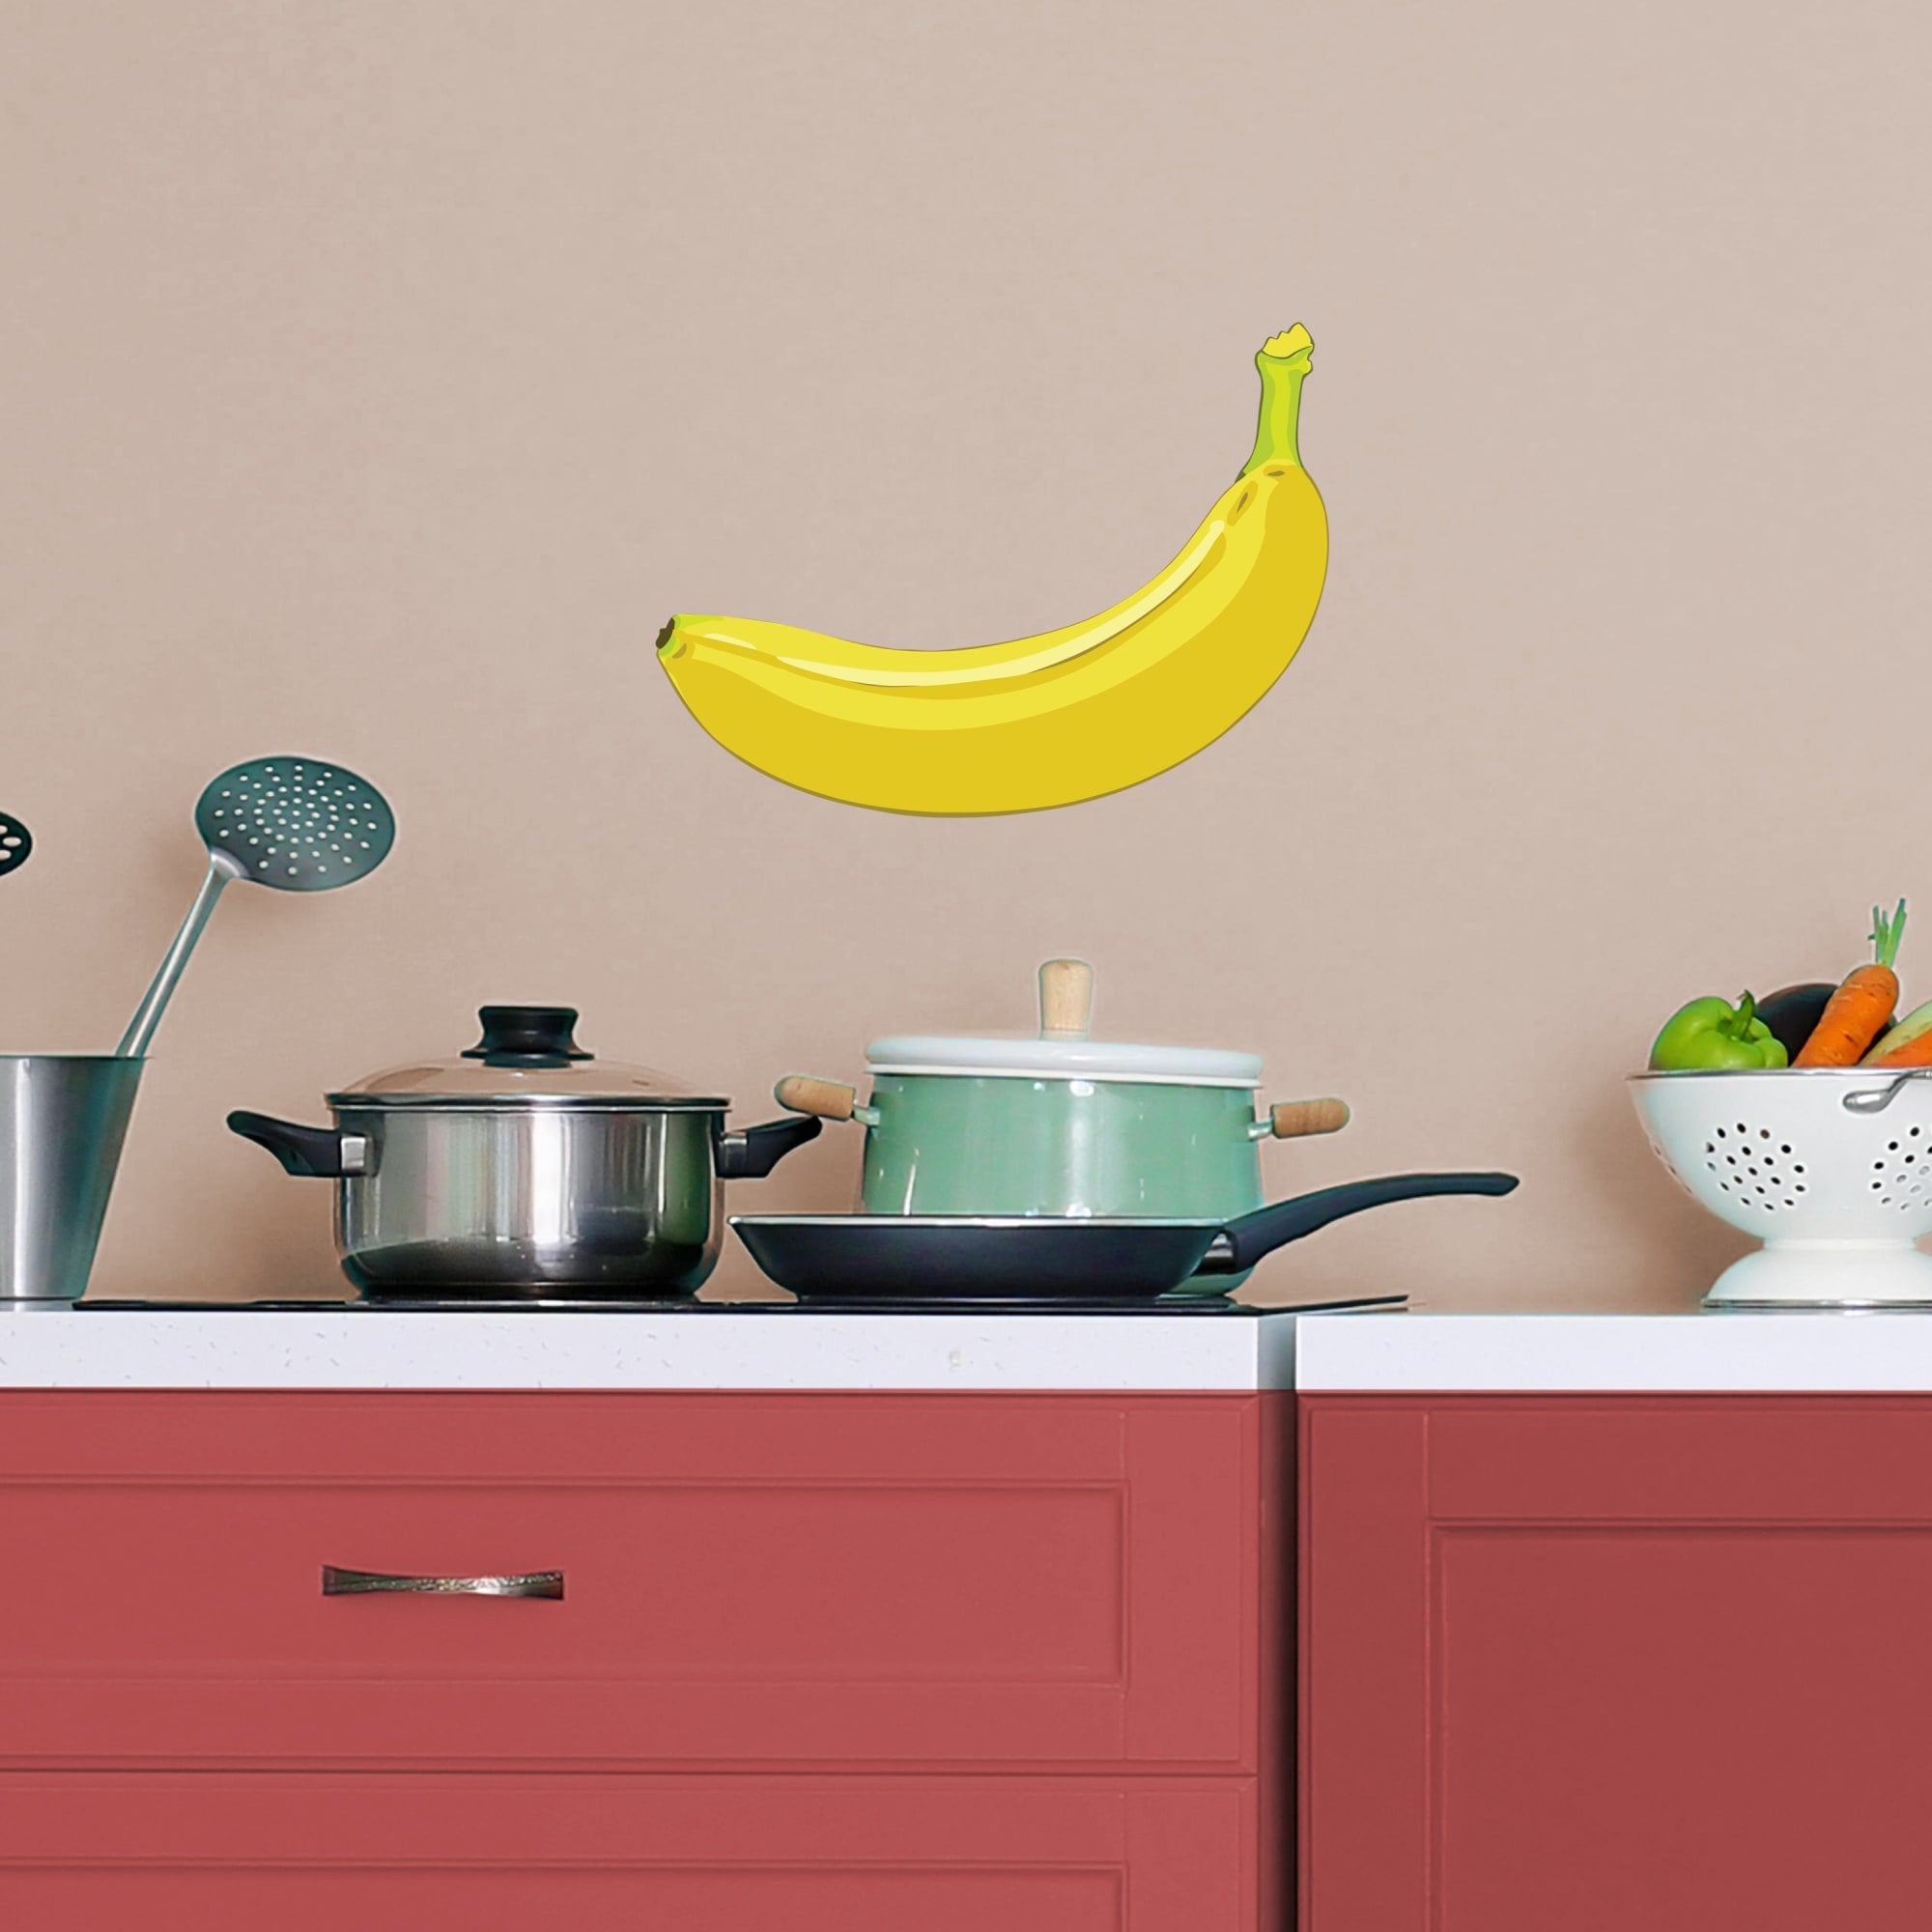 Banana: Illustrated - Removable Vinyl Decal Large by Fathead